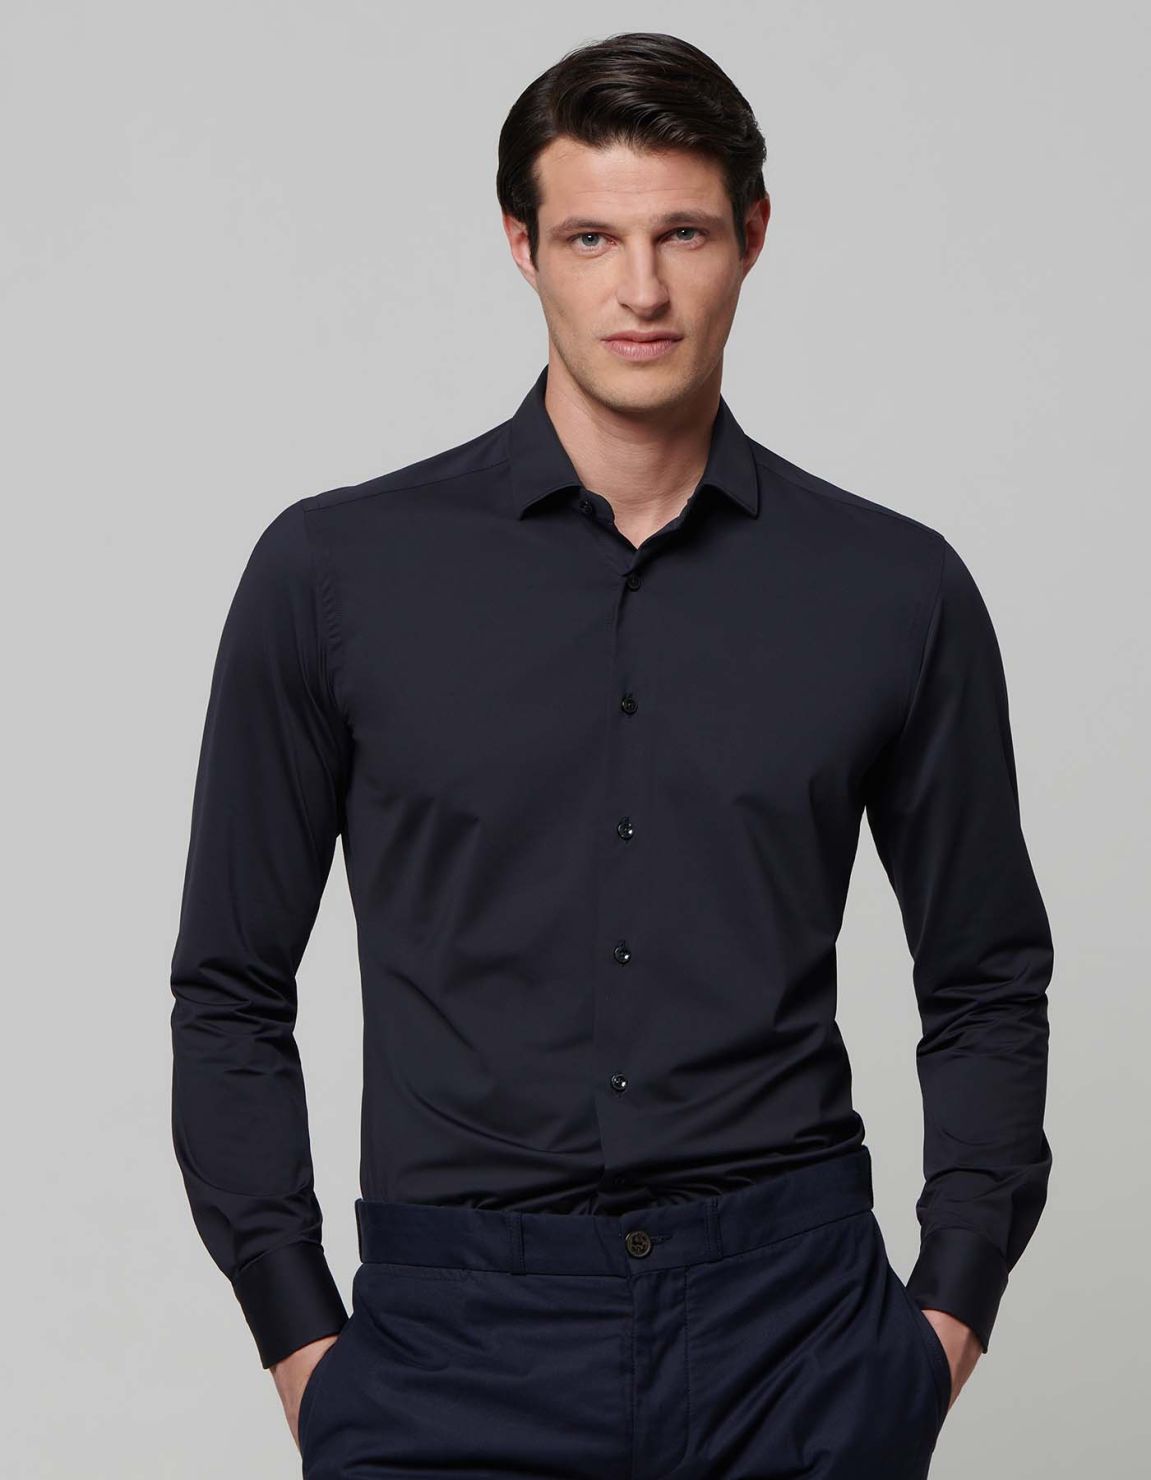 Navy Blue Textured Solid colour Shirt Collar small cutaway Evolution Classic Fit 5